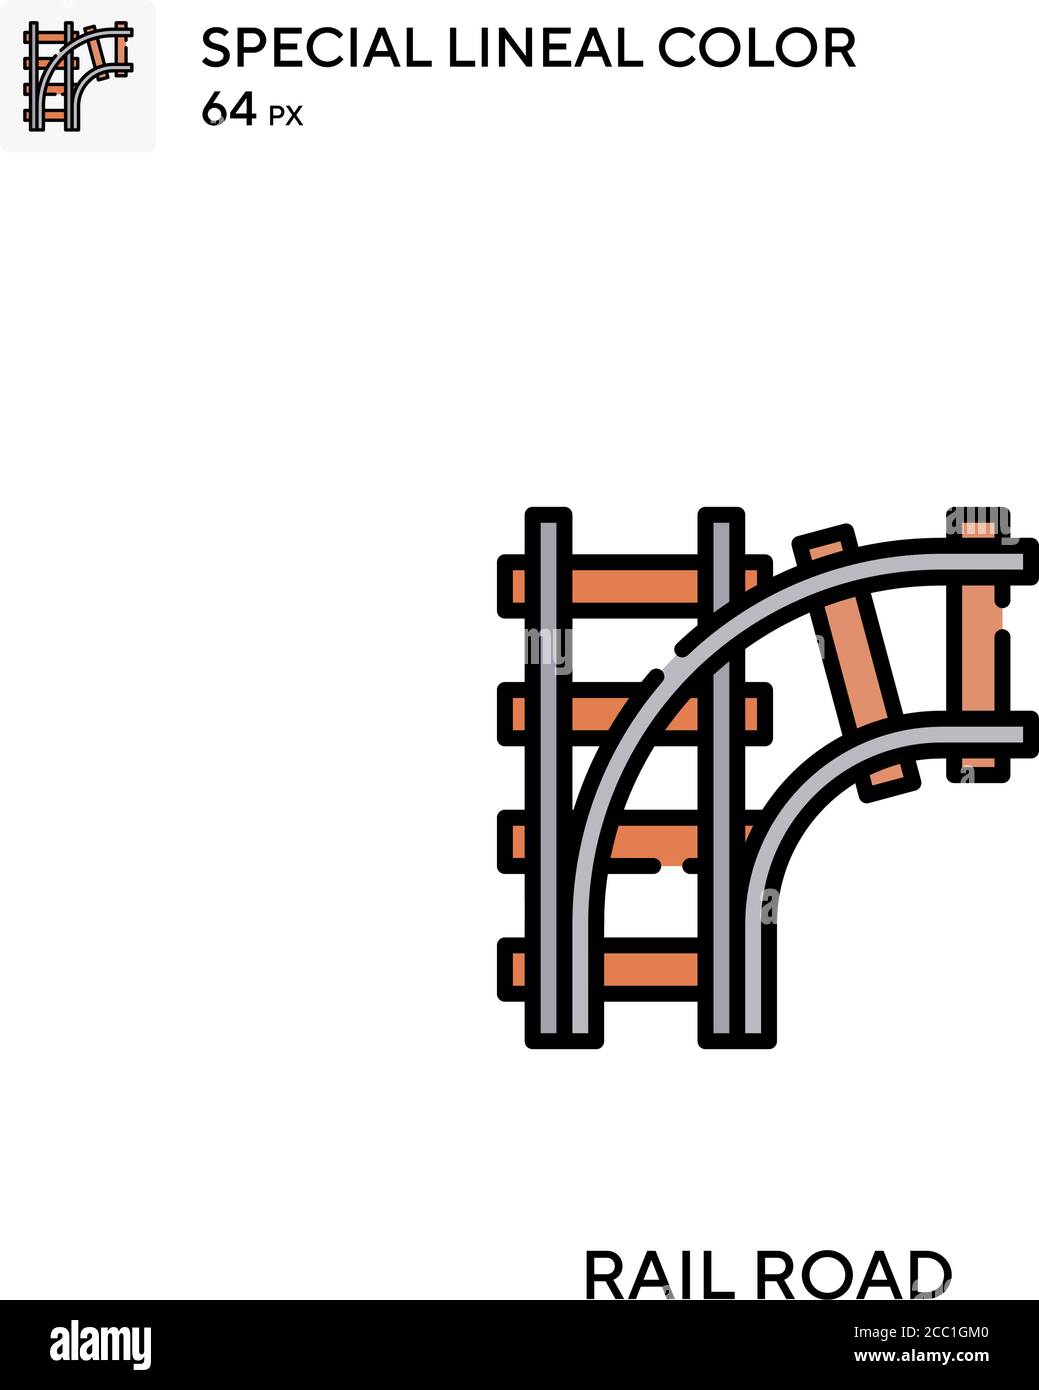 Rail road Special lineal color vector icon. Rail road icons for your business project Stock Vector